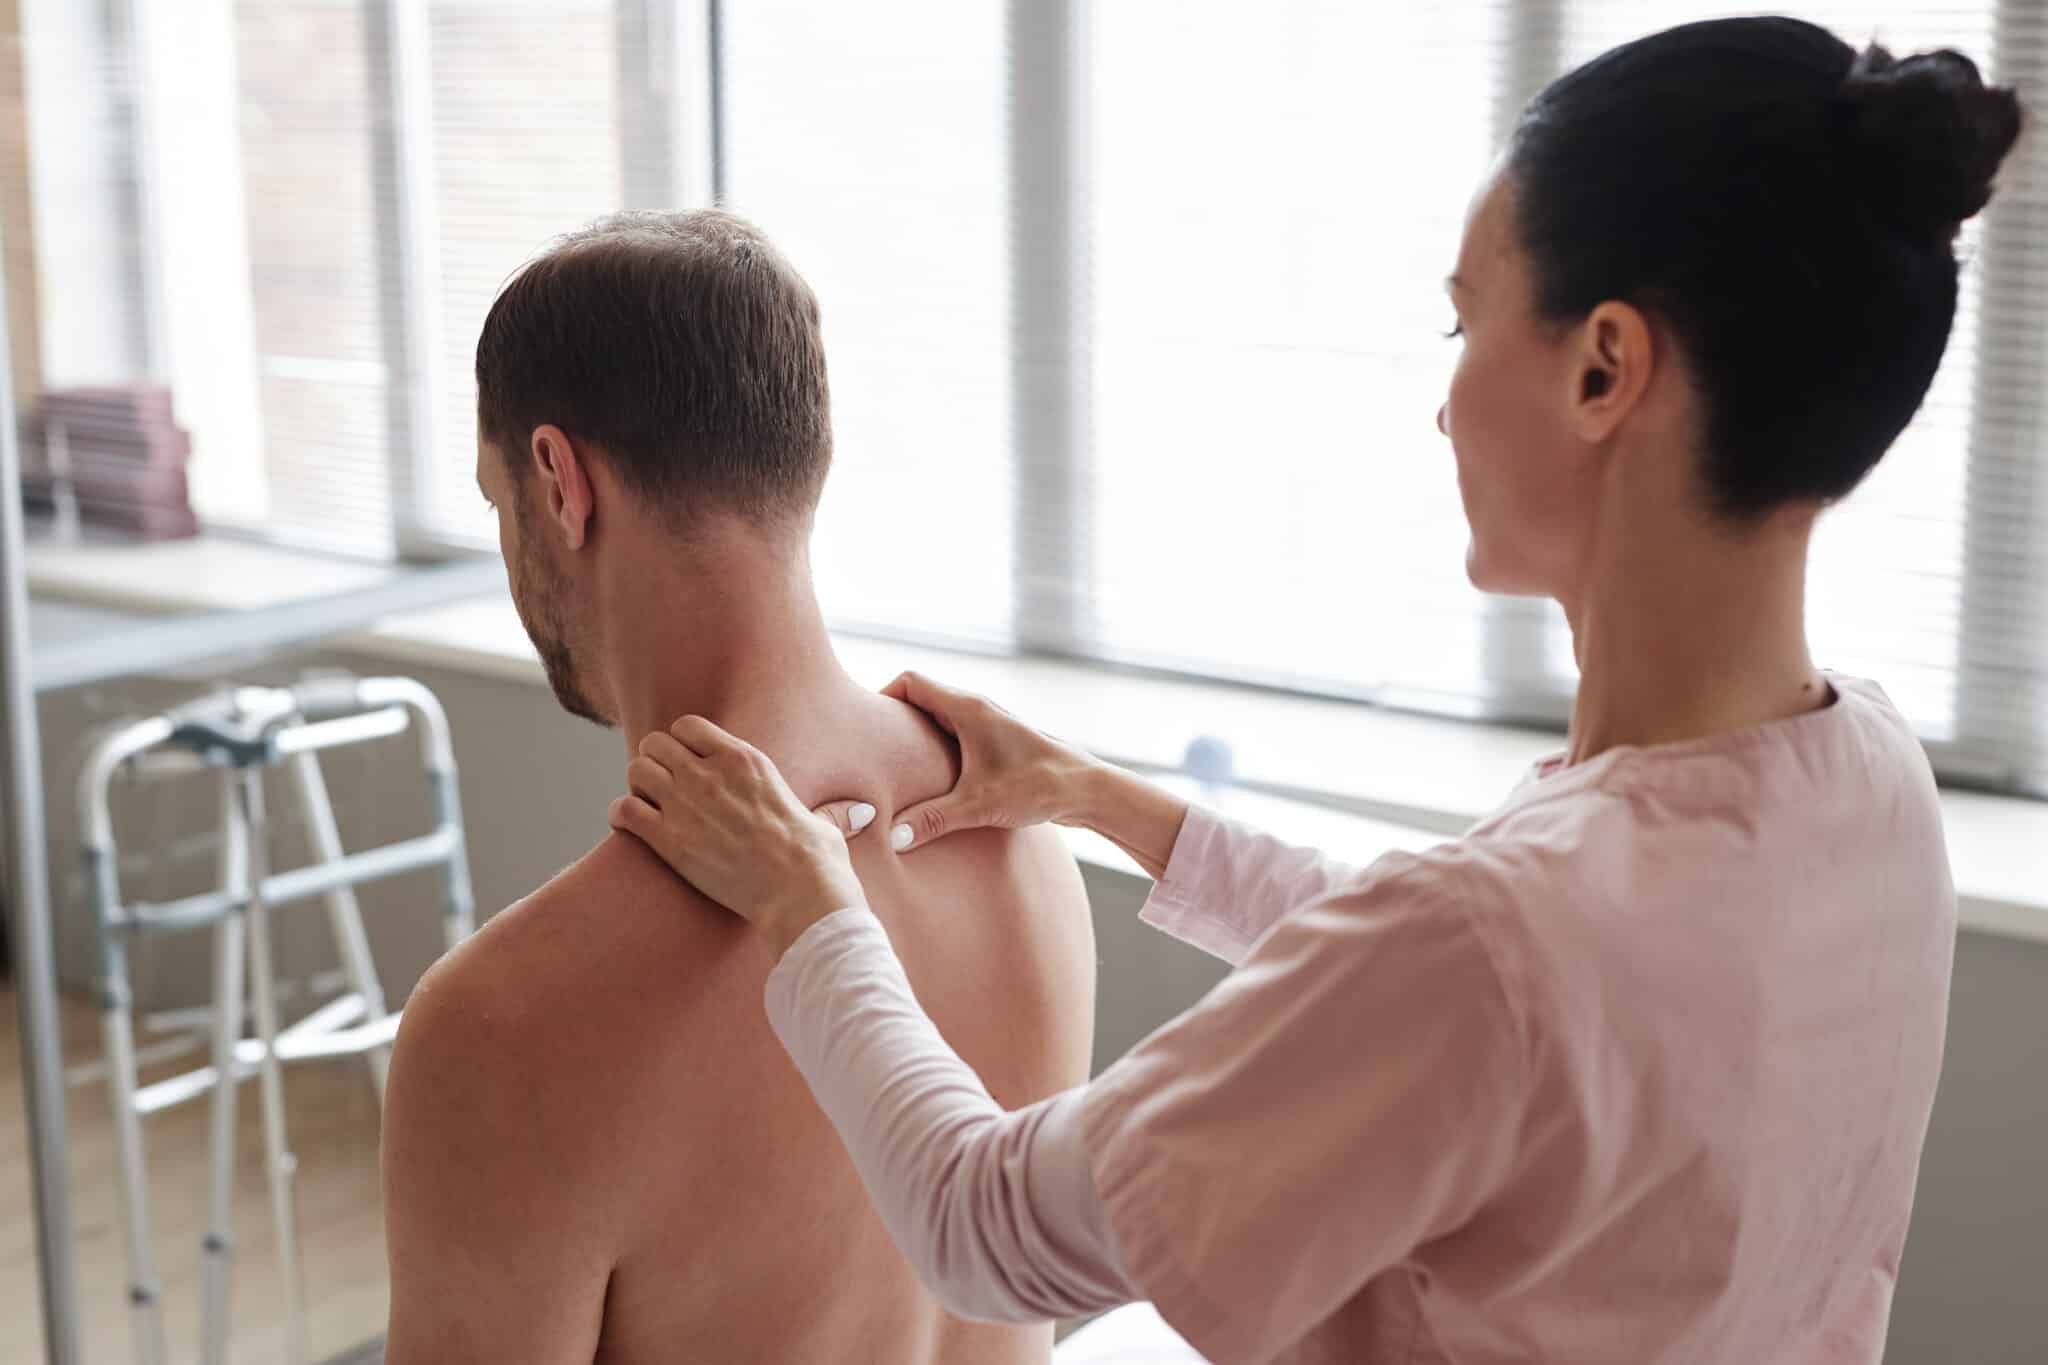 Manual therapist massaging back of patient